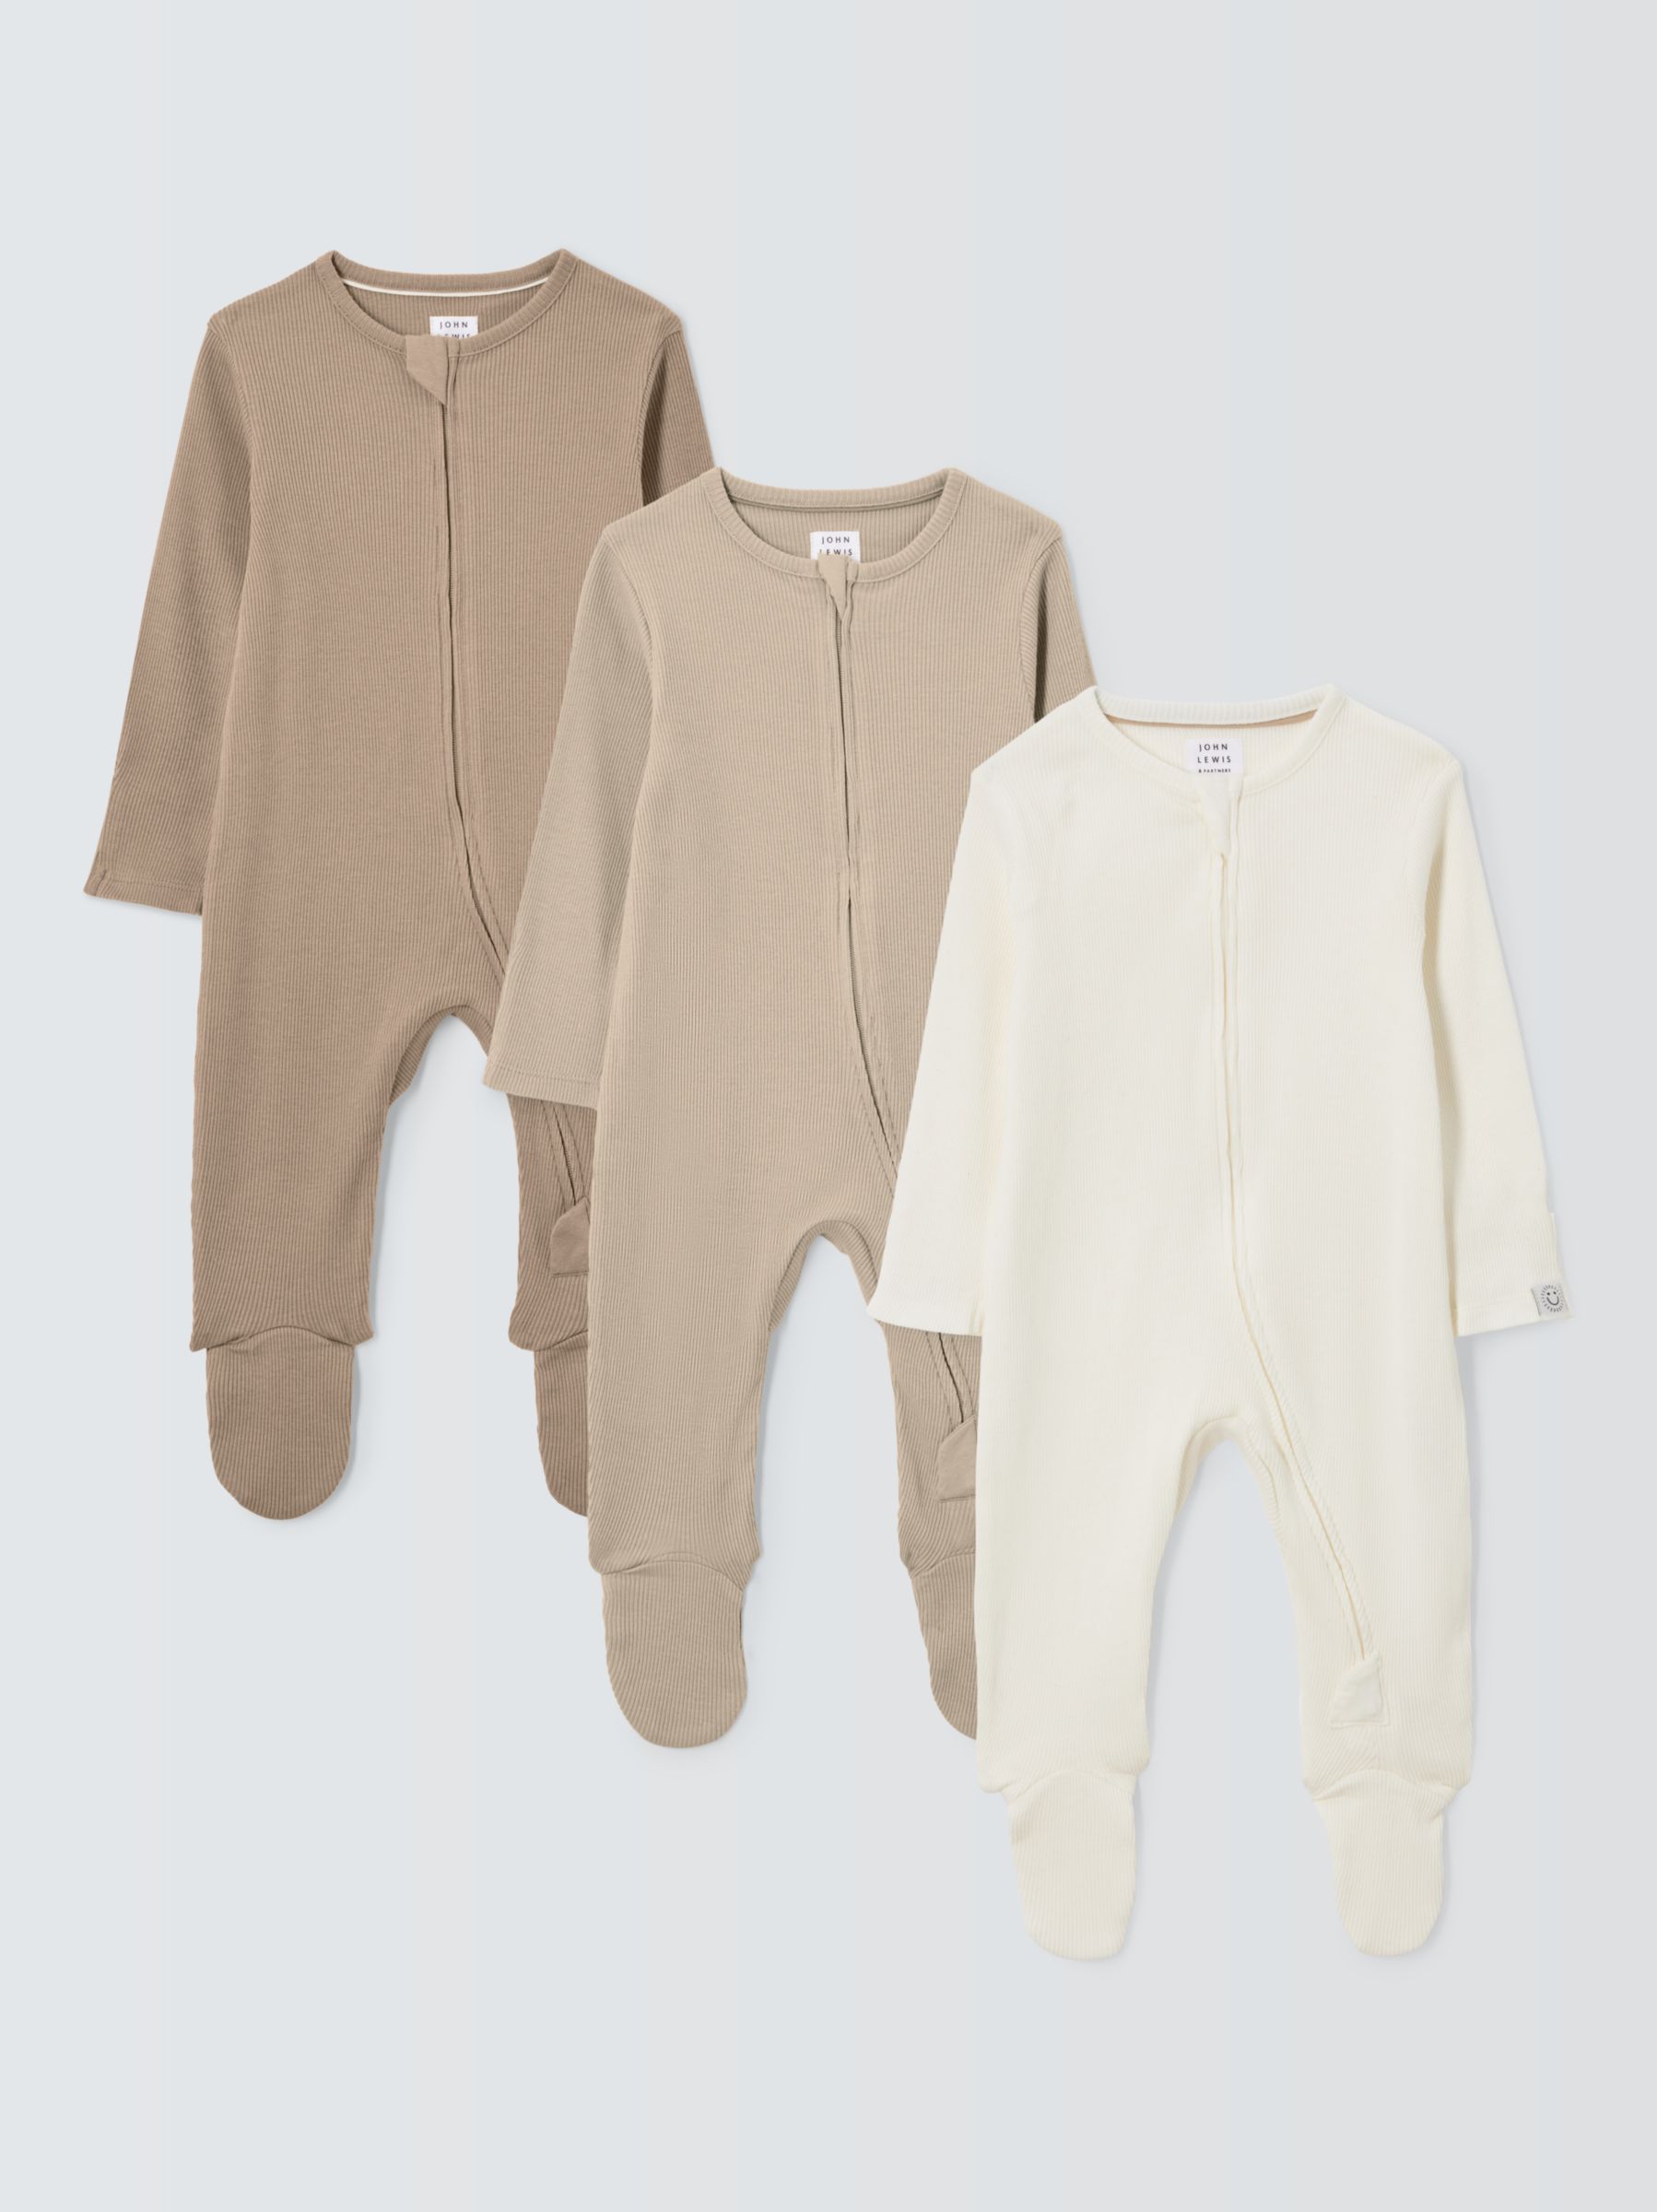 John Lewis Baby Two Way Zip Ribbed Sleepsuit, Pack of 3, Neutrals, 3-6 months